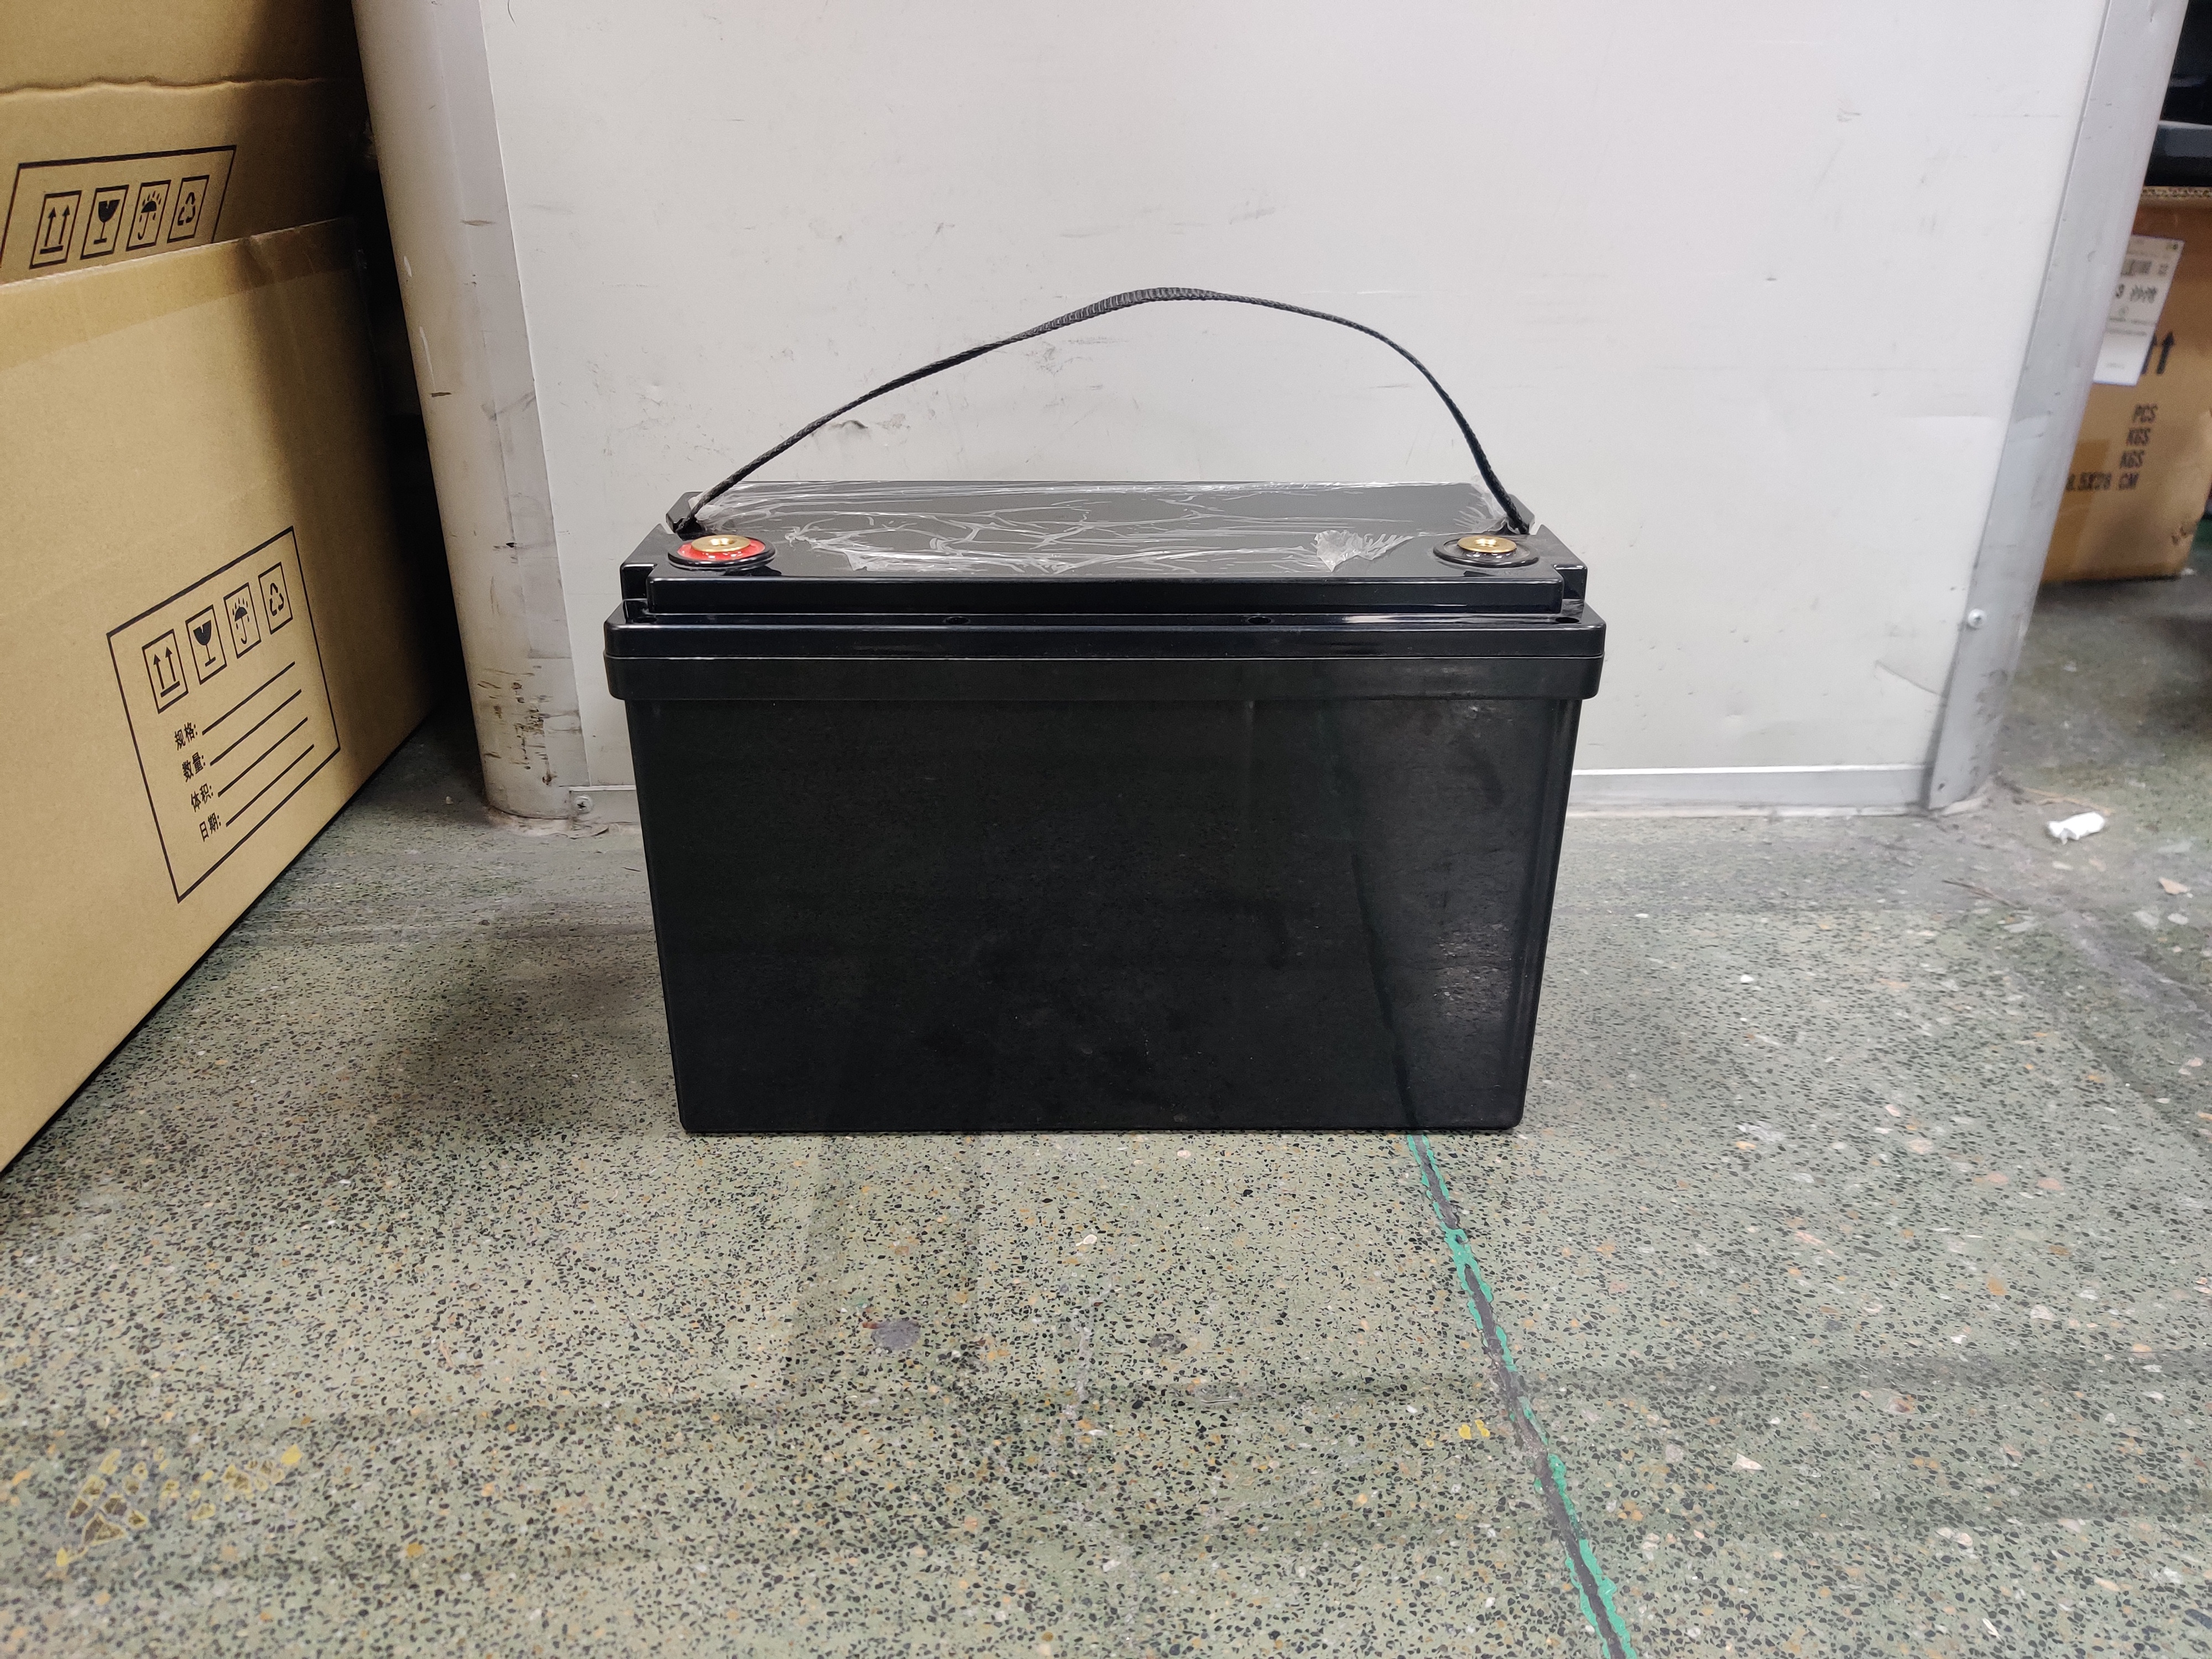 3000Wh Lithium Iron Phosphate Battery